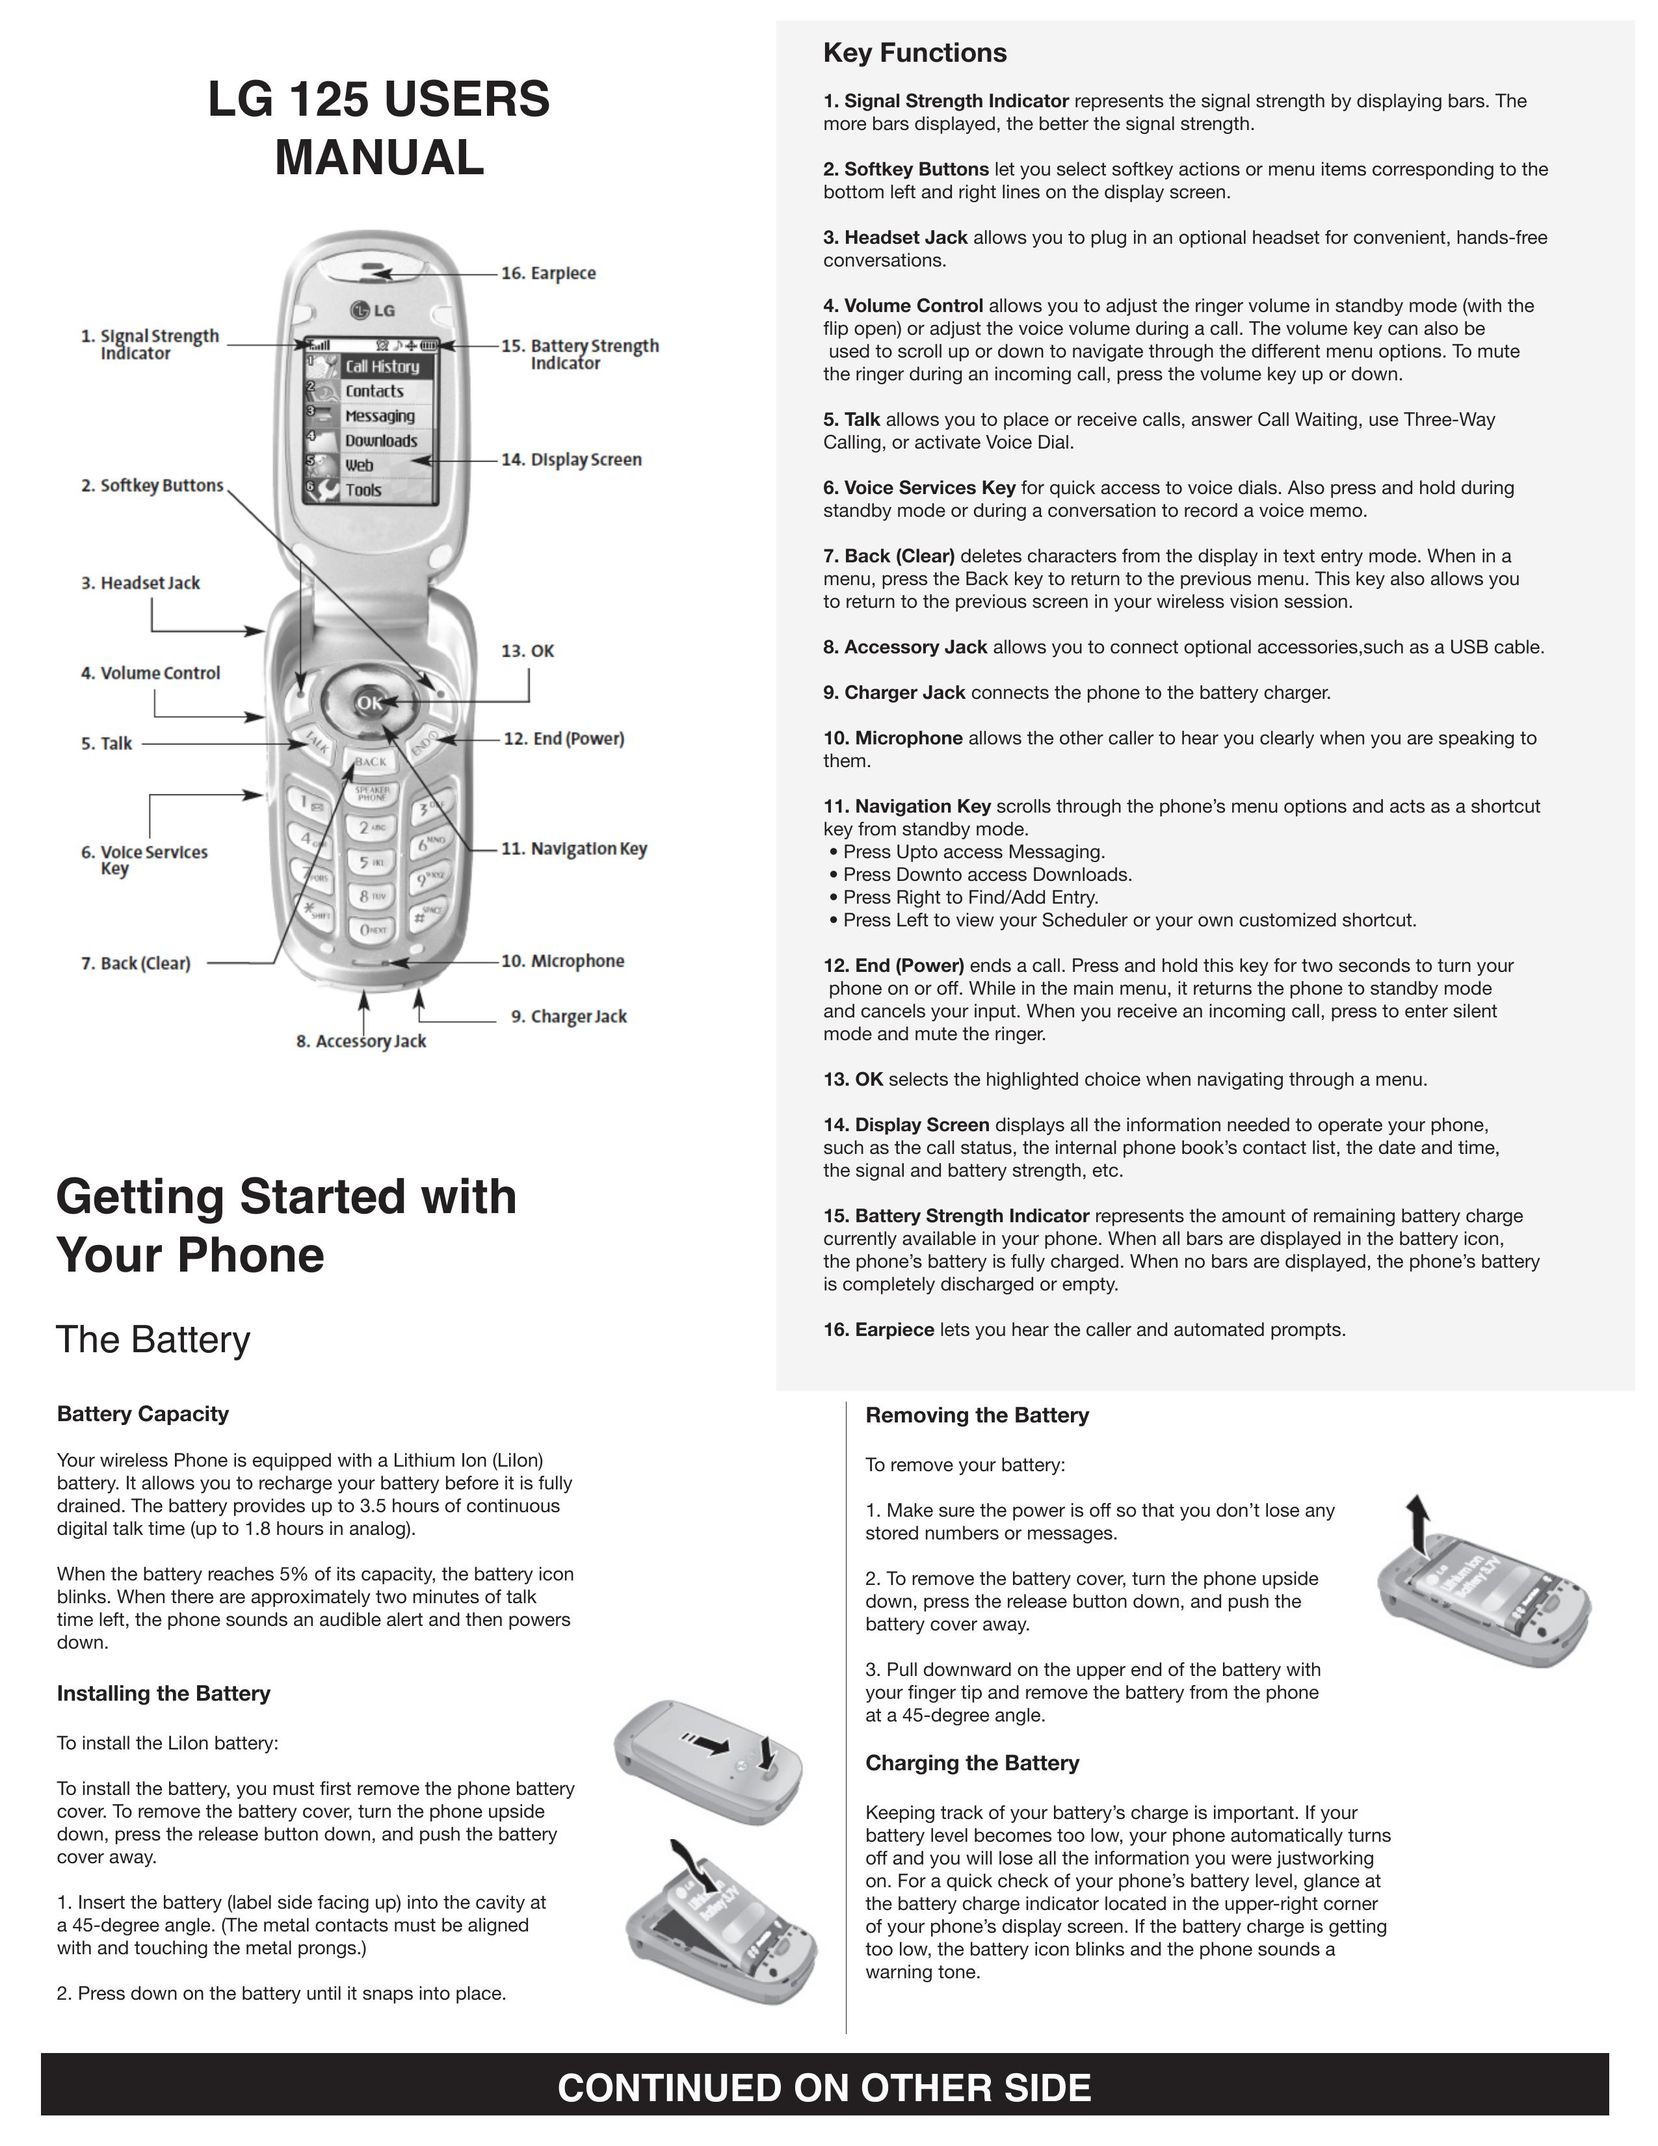 LG Electronics 125 Cell Phone User Manual